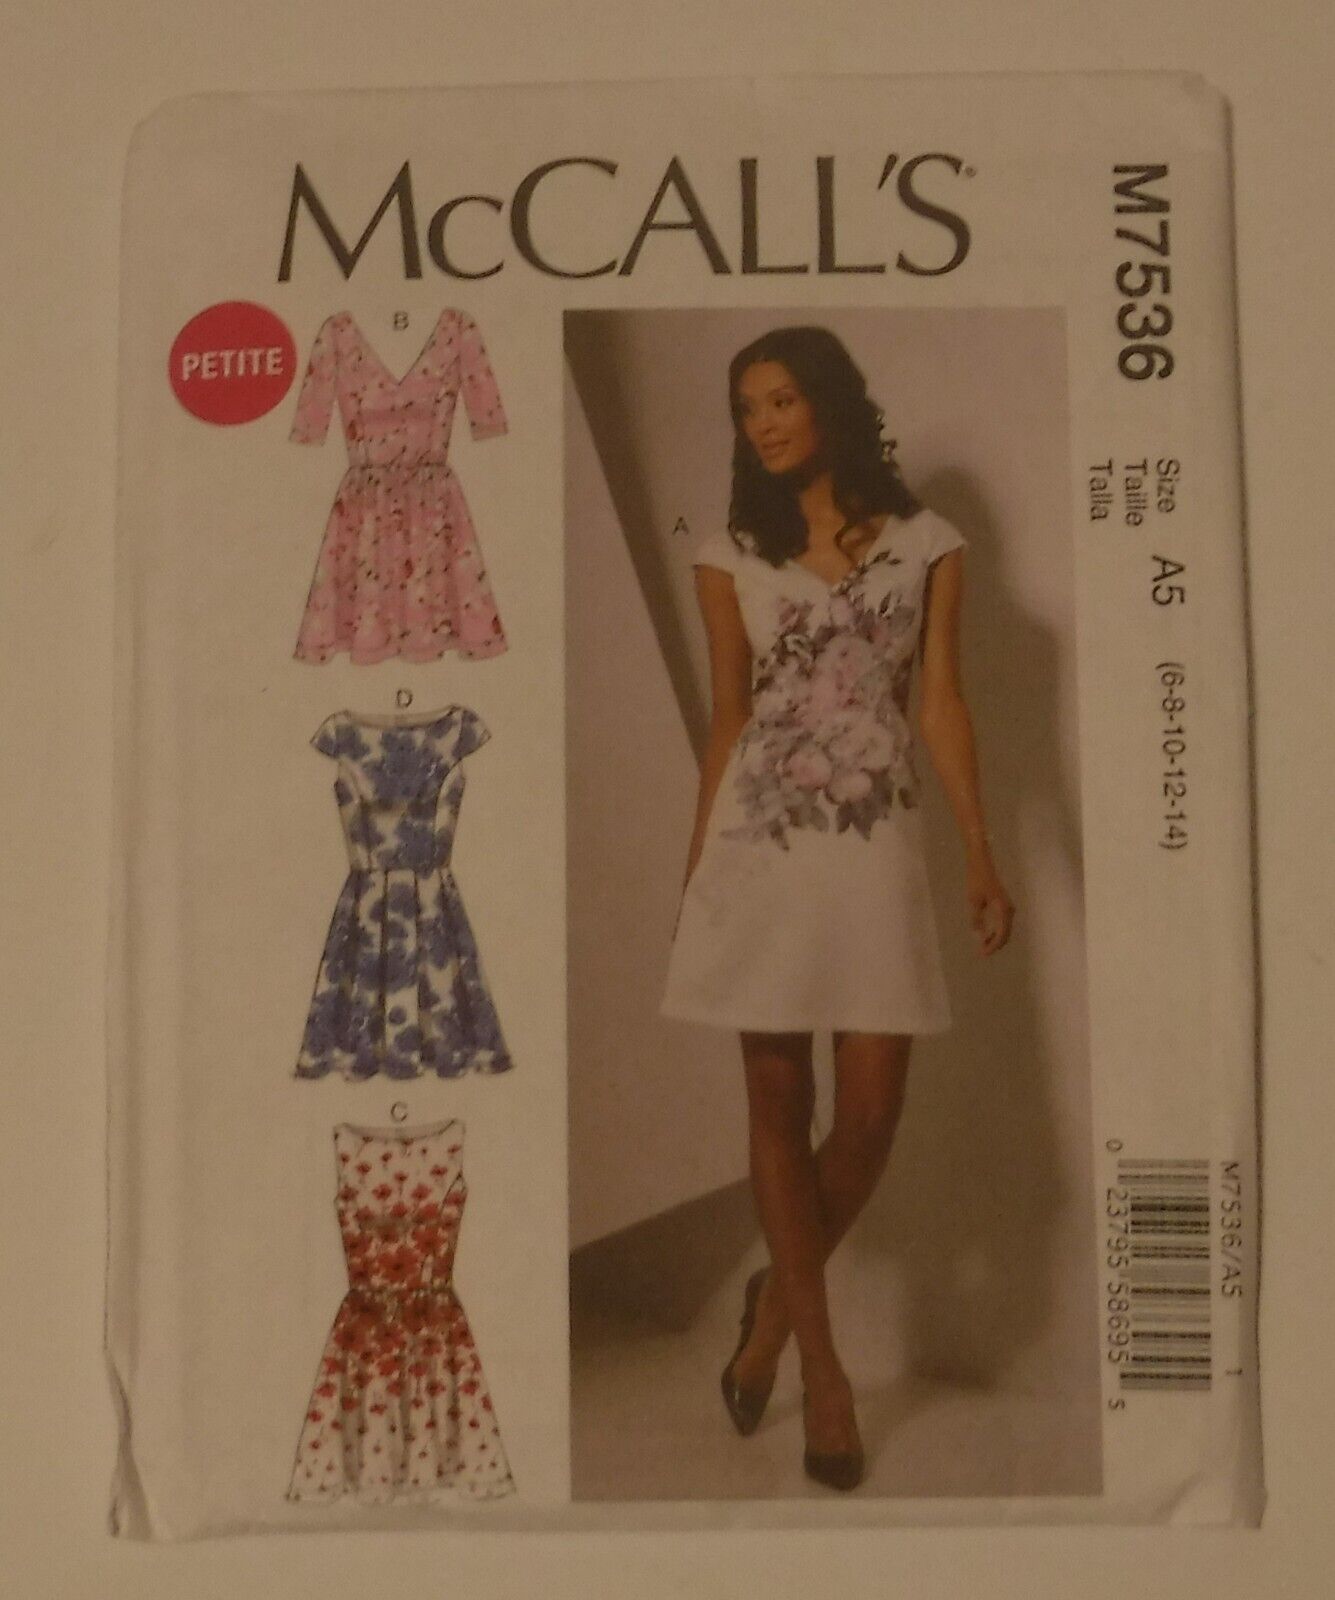 Primary image for McCalls Sewing Pattern # M7536 Misses Miss Petite Dresses Uncut